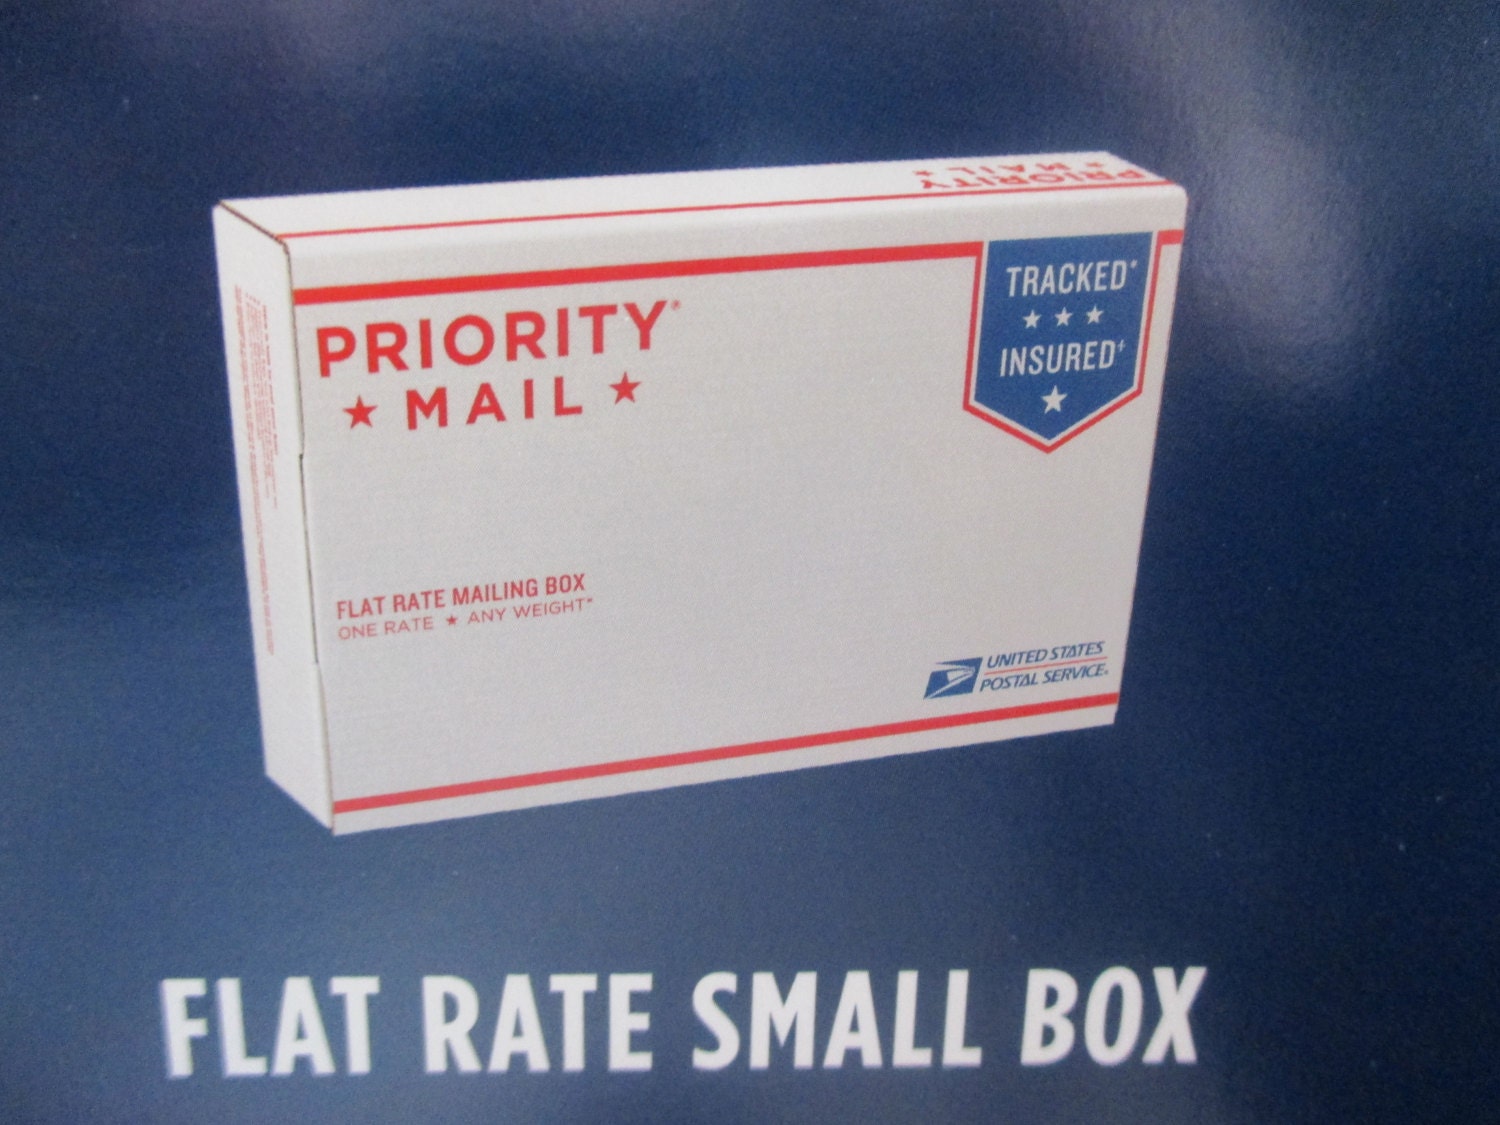 usps priority mail flat rates